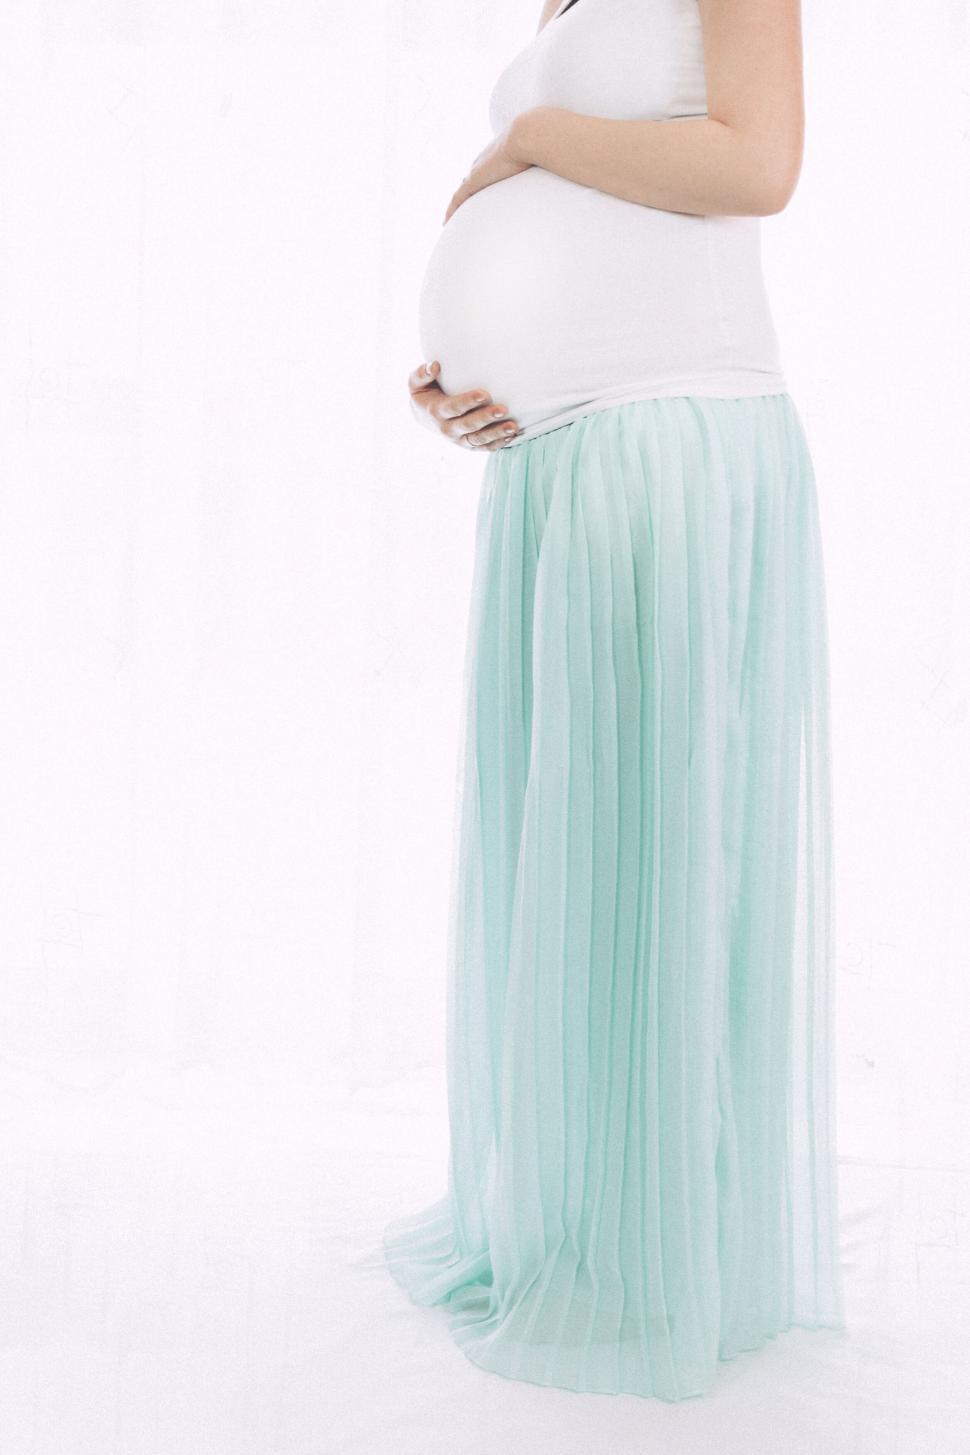 Free Image of Elegant pregnant woman in a blue dress 